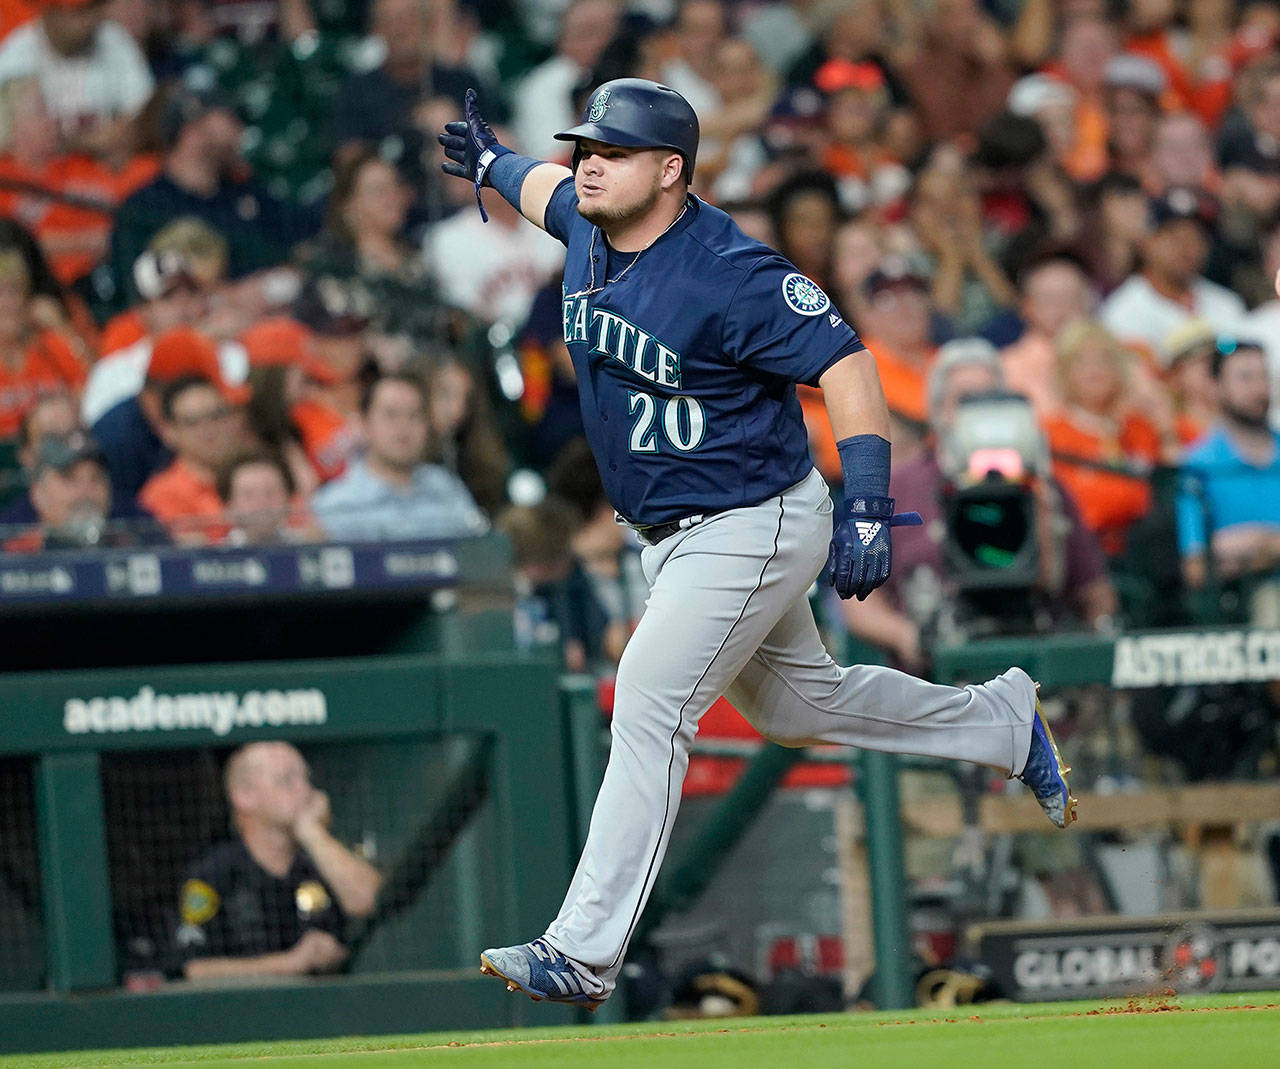 Seattle’s Daniel Vogelbach celebrates after hitting a grand slam against the Houston Astros during the eighth inning of a game on Monday in Houston. (David J. Phillip / Associated Press)